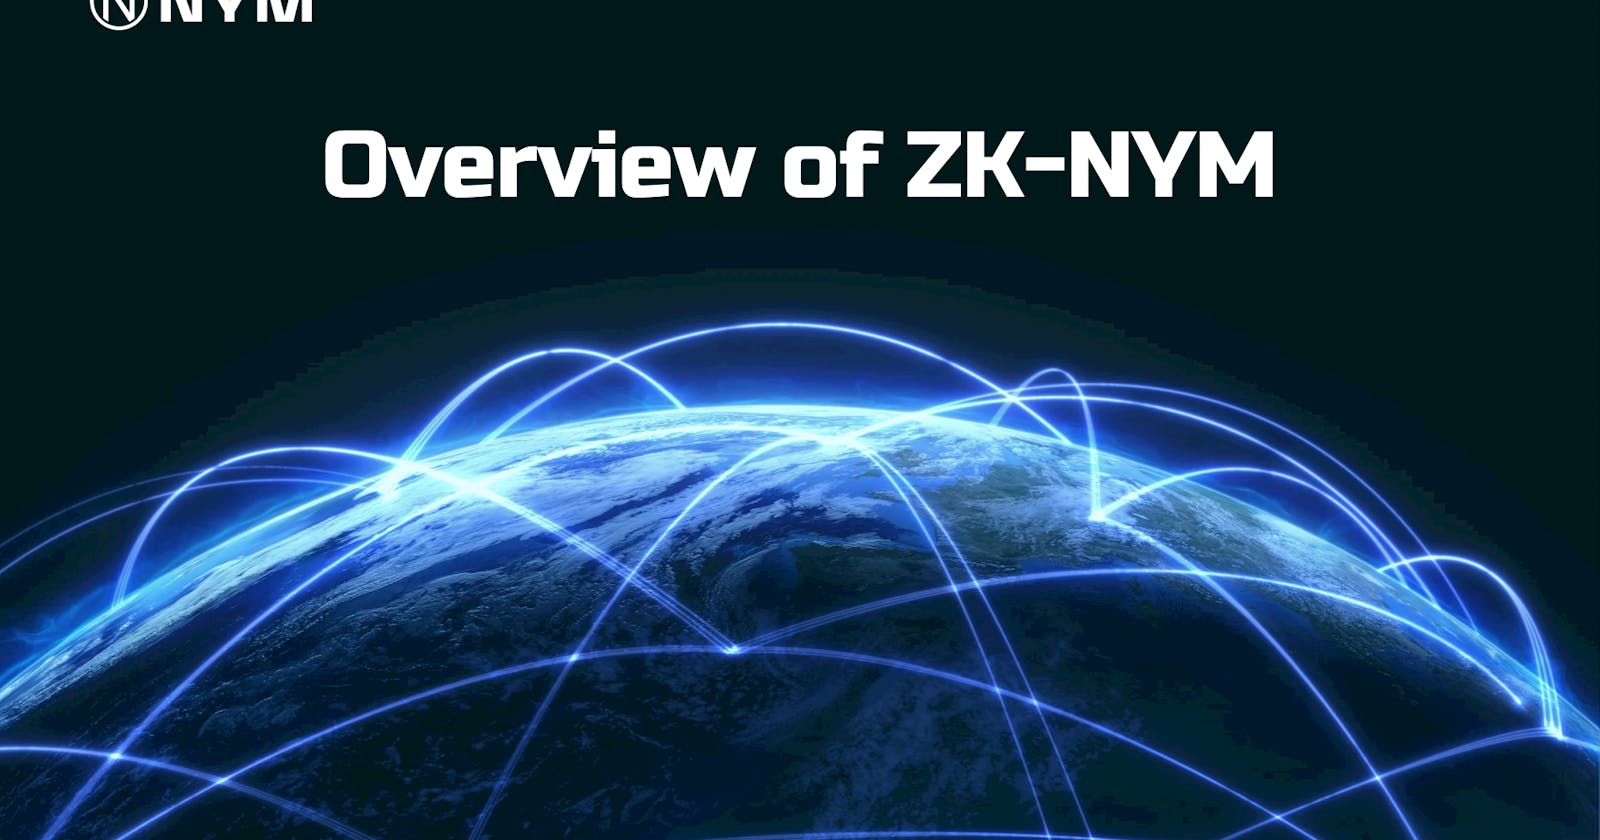 Overview of ZK-NYM